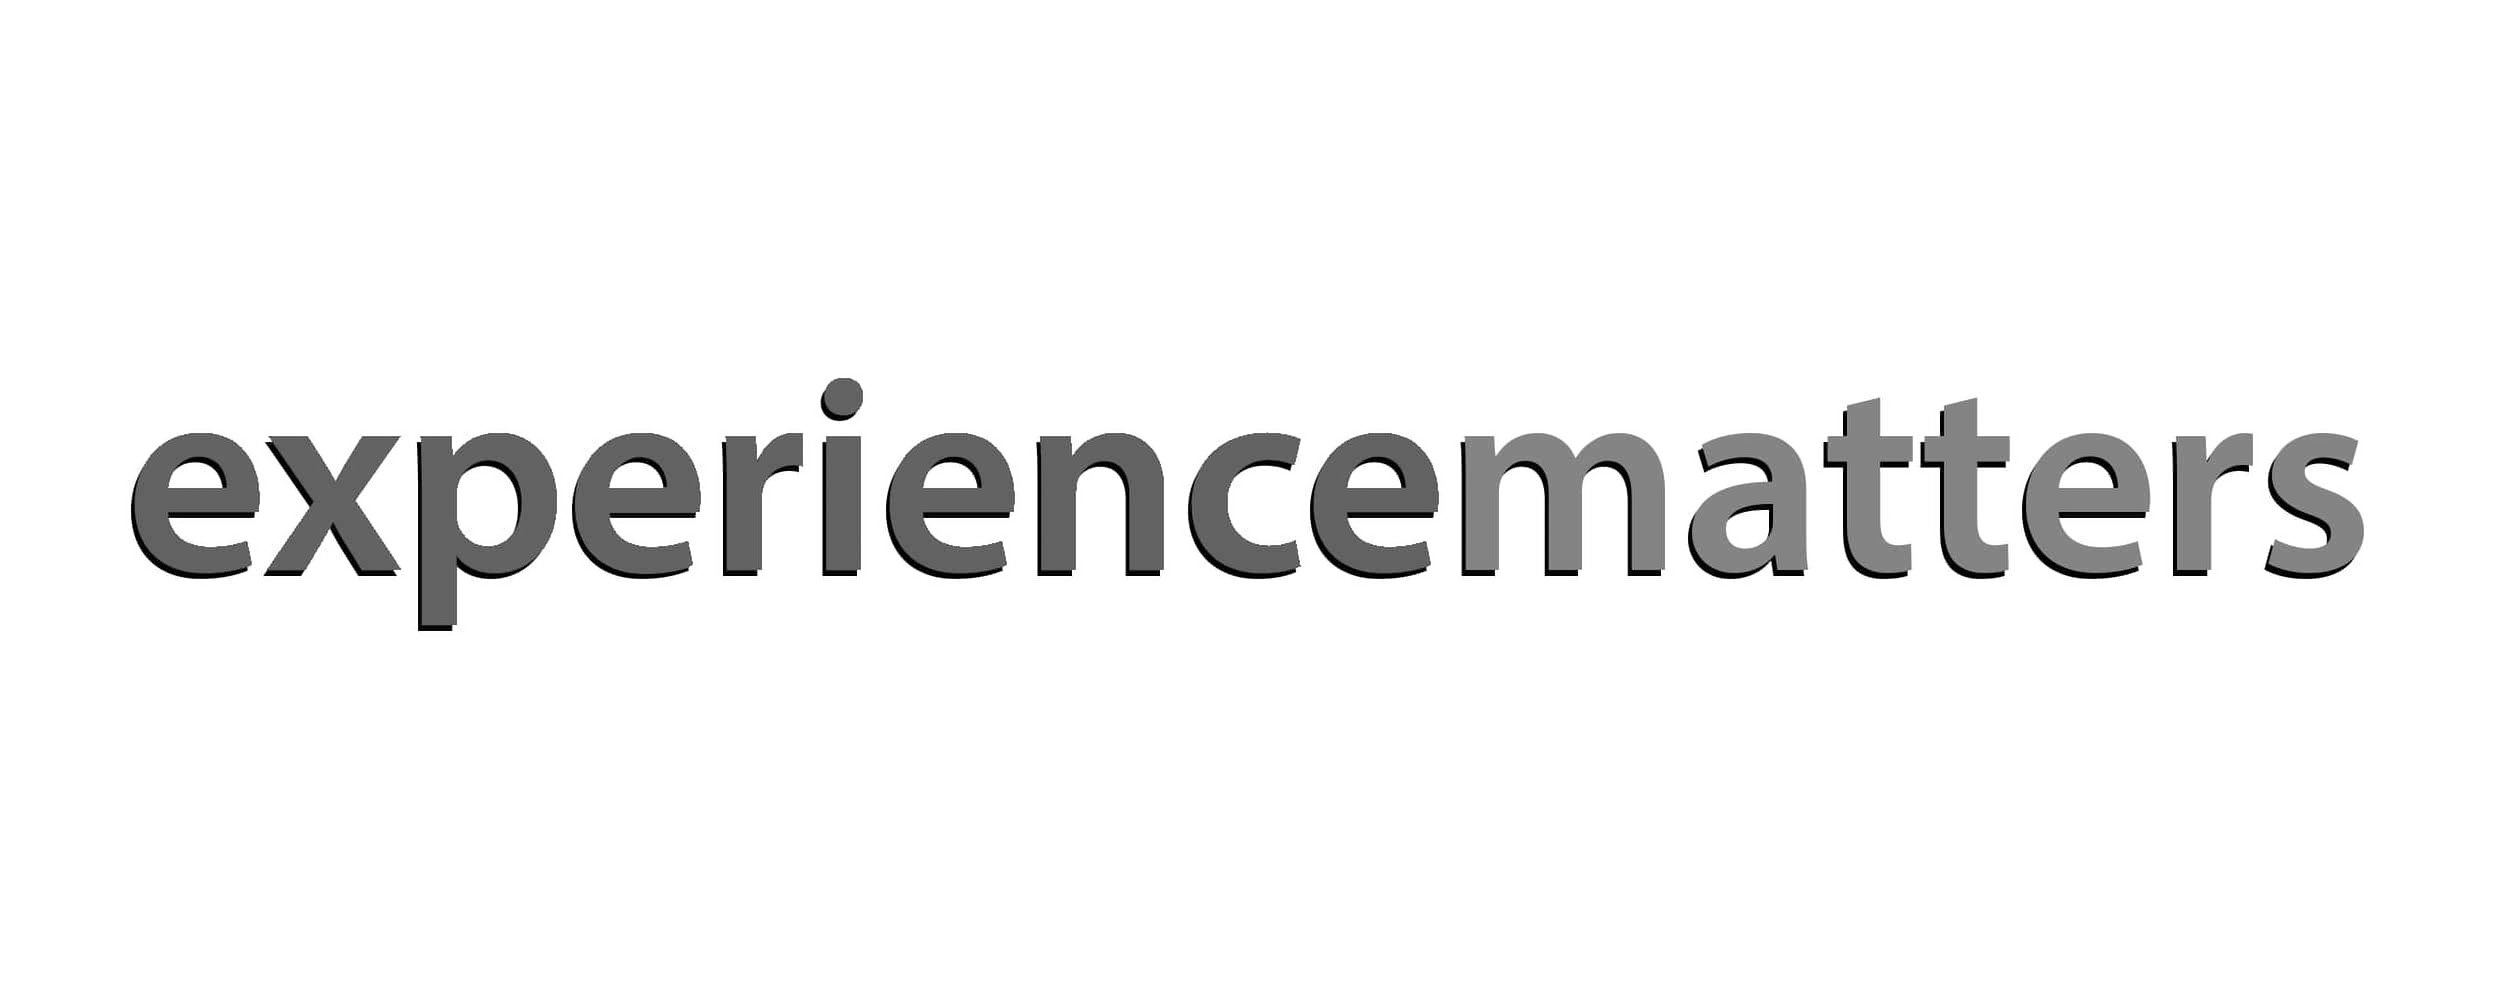 EXPERIENCEMATTERS